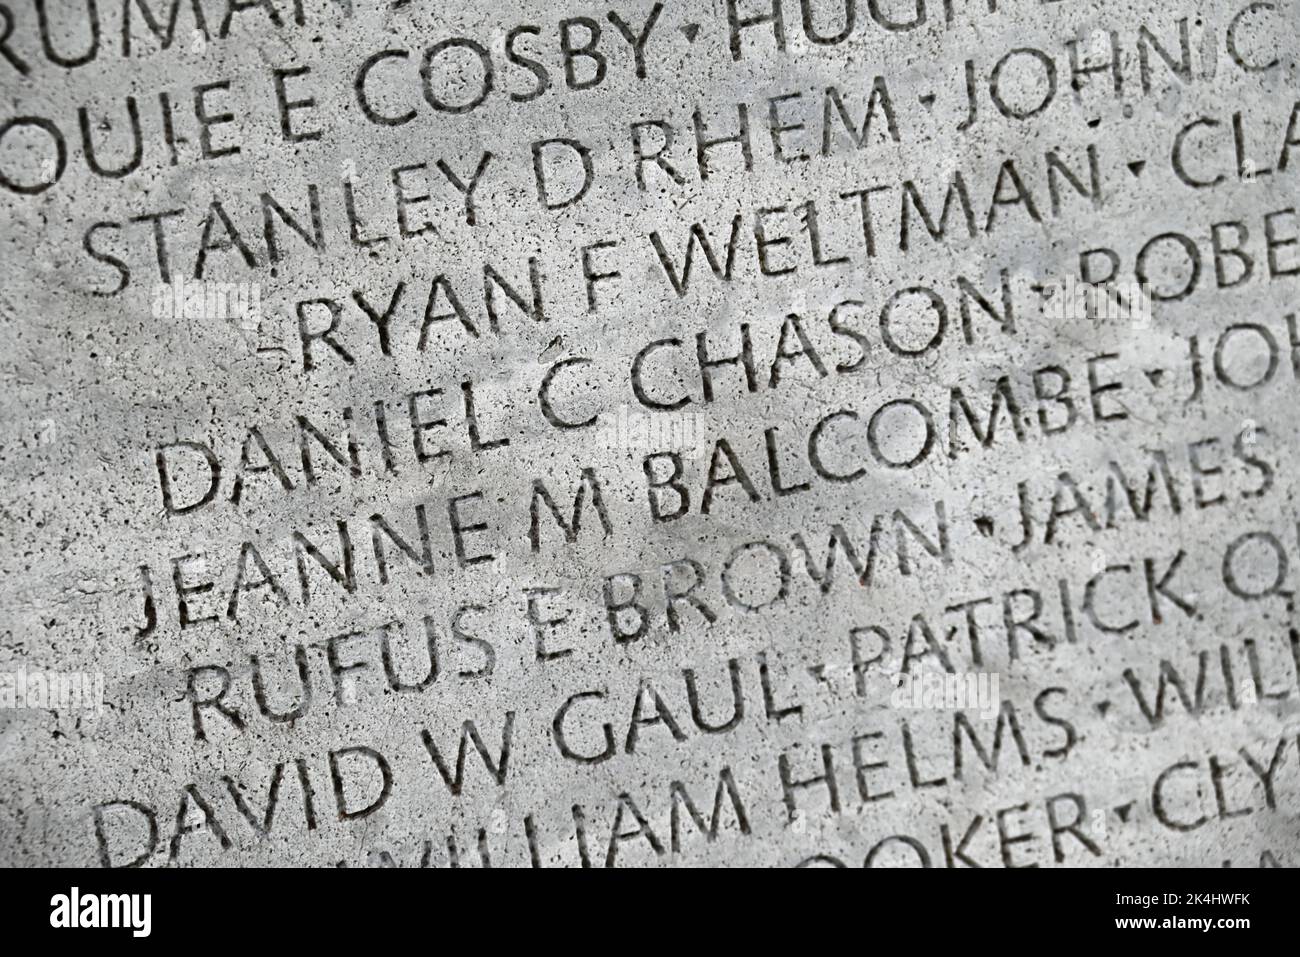 Close up of the name Daniel Chason, etched on the Law Enforcement Memorial Wall in Washington, DC. Police Sgt for Fayetteville NC killed Oct 21, 1925. Stock Photo